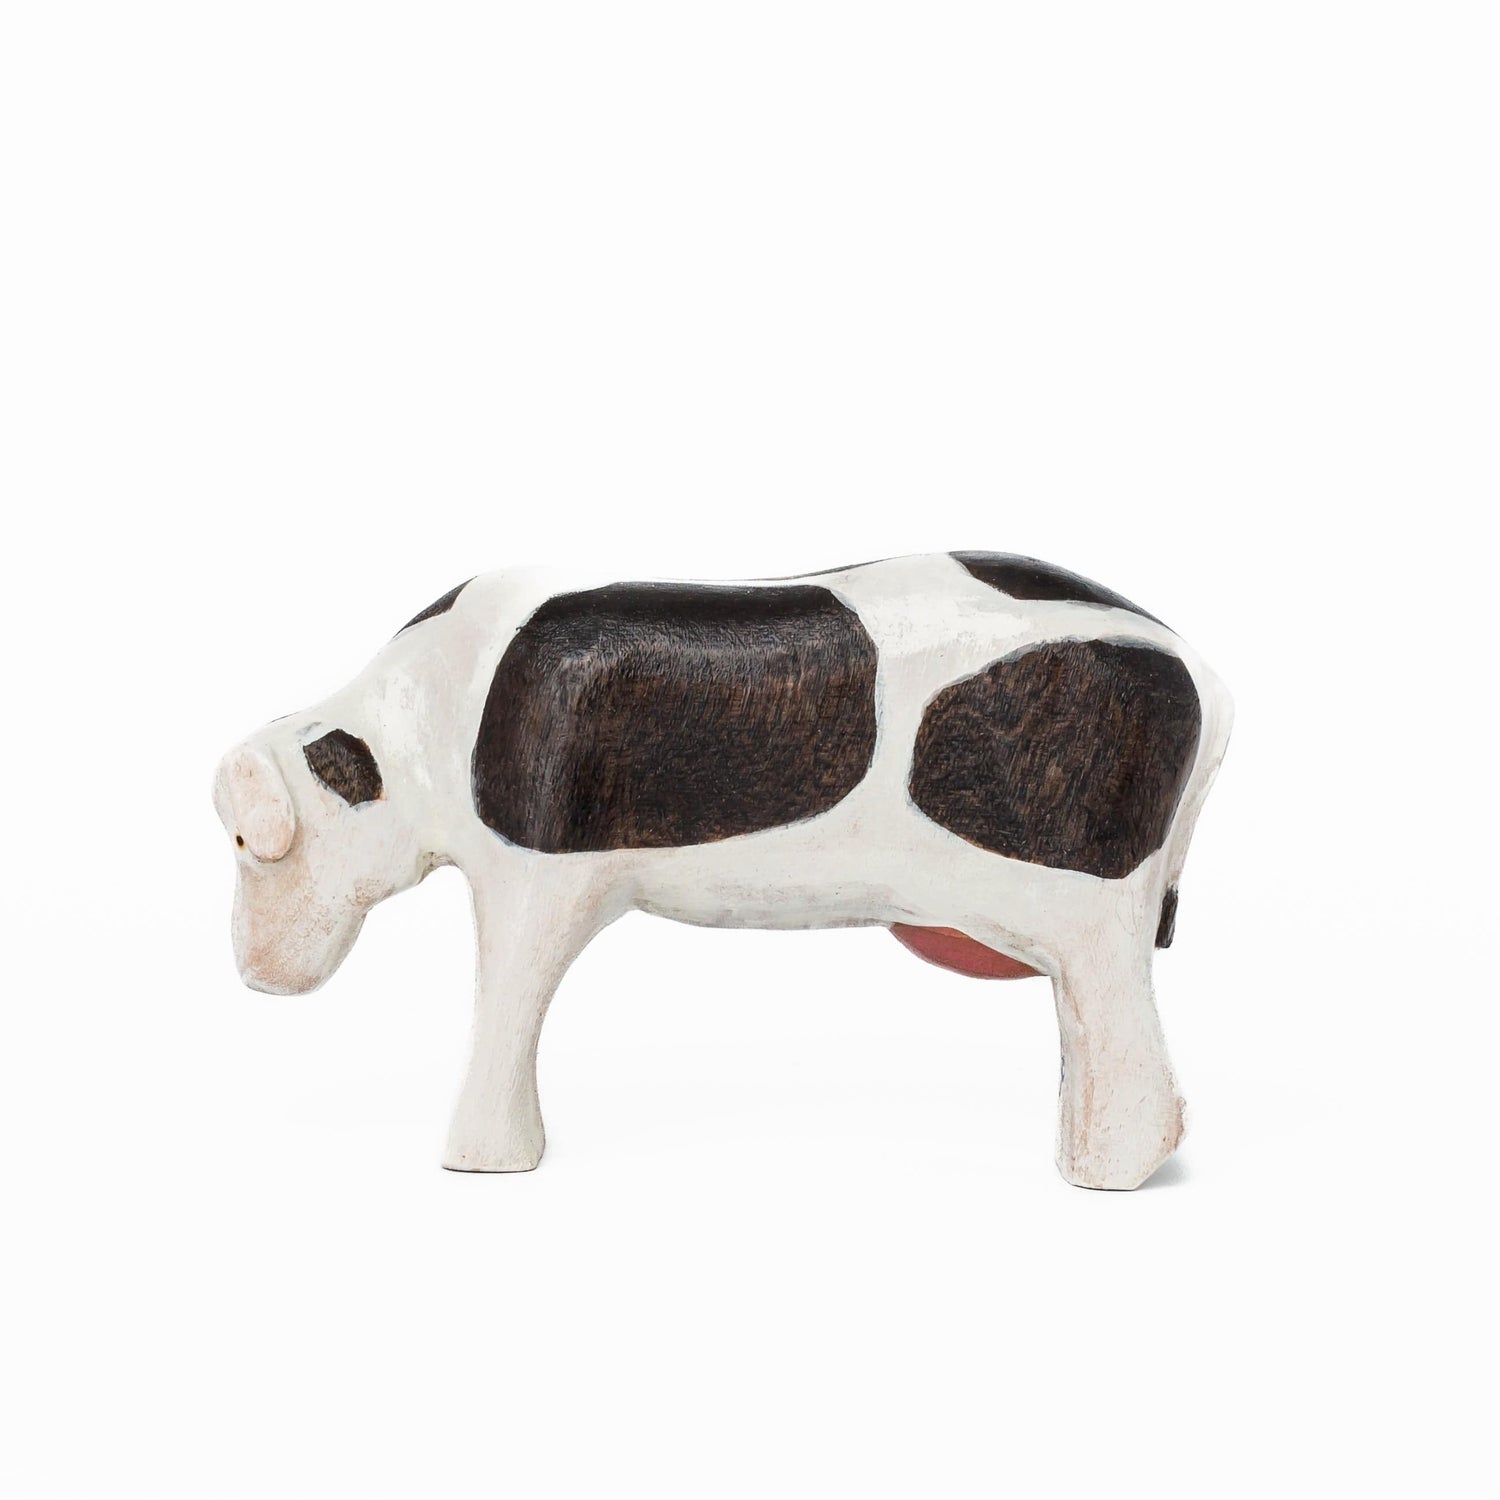 Bumbleberry Toys Wooden Animals "Clover Cow" Wooden Animal Toy (Handmade in Canada)